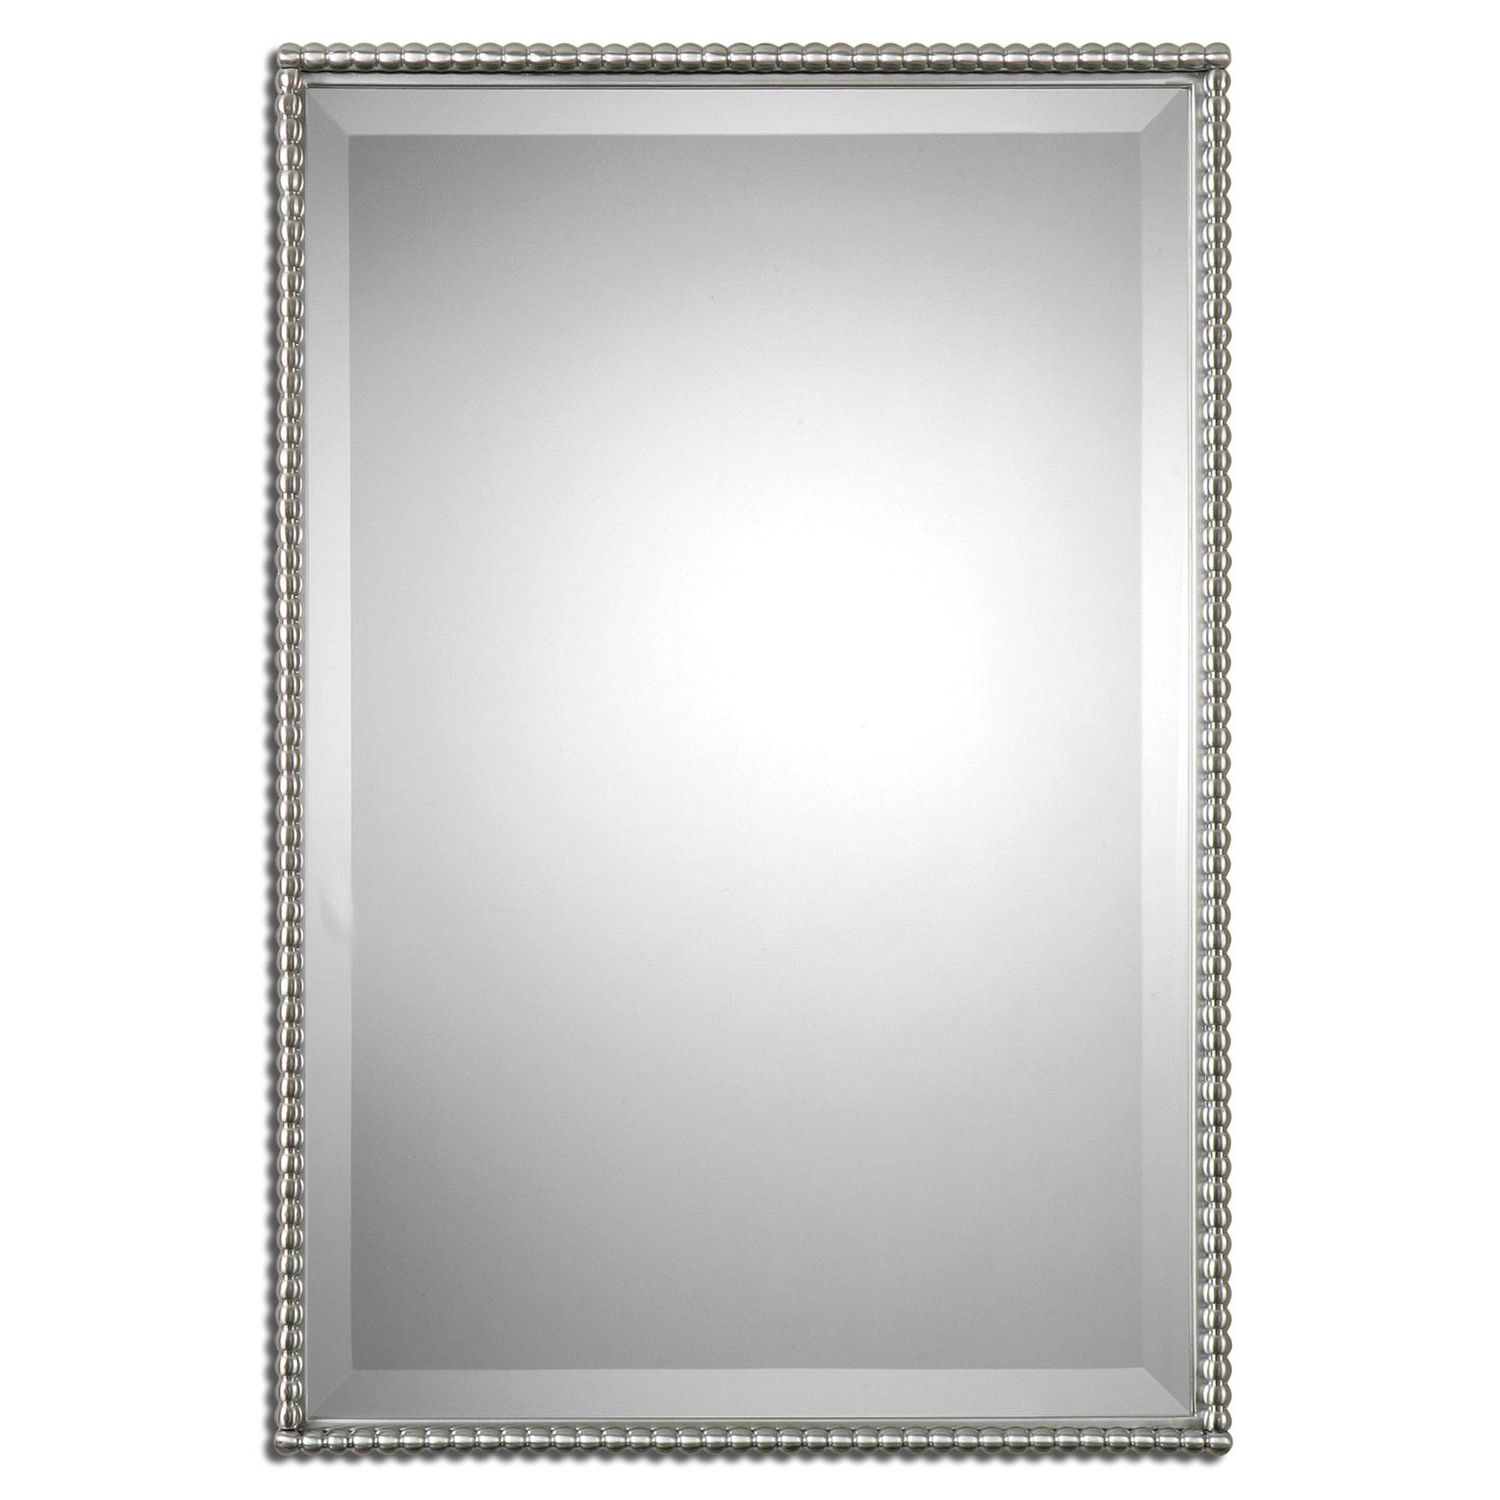 Large Silver Framed Wall Mirror With Regard To 2019 Top 34 Blue Ribbon Brushed Nickel Bathroom Mirror Sherise (View 10 of 20)